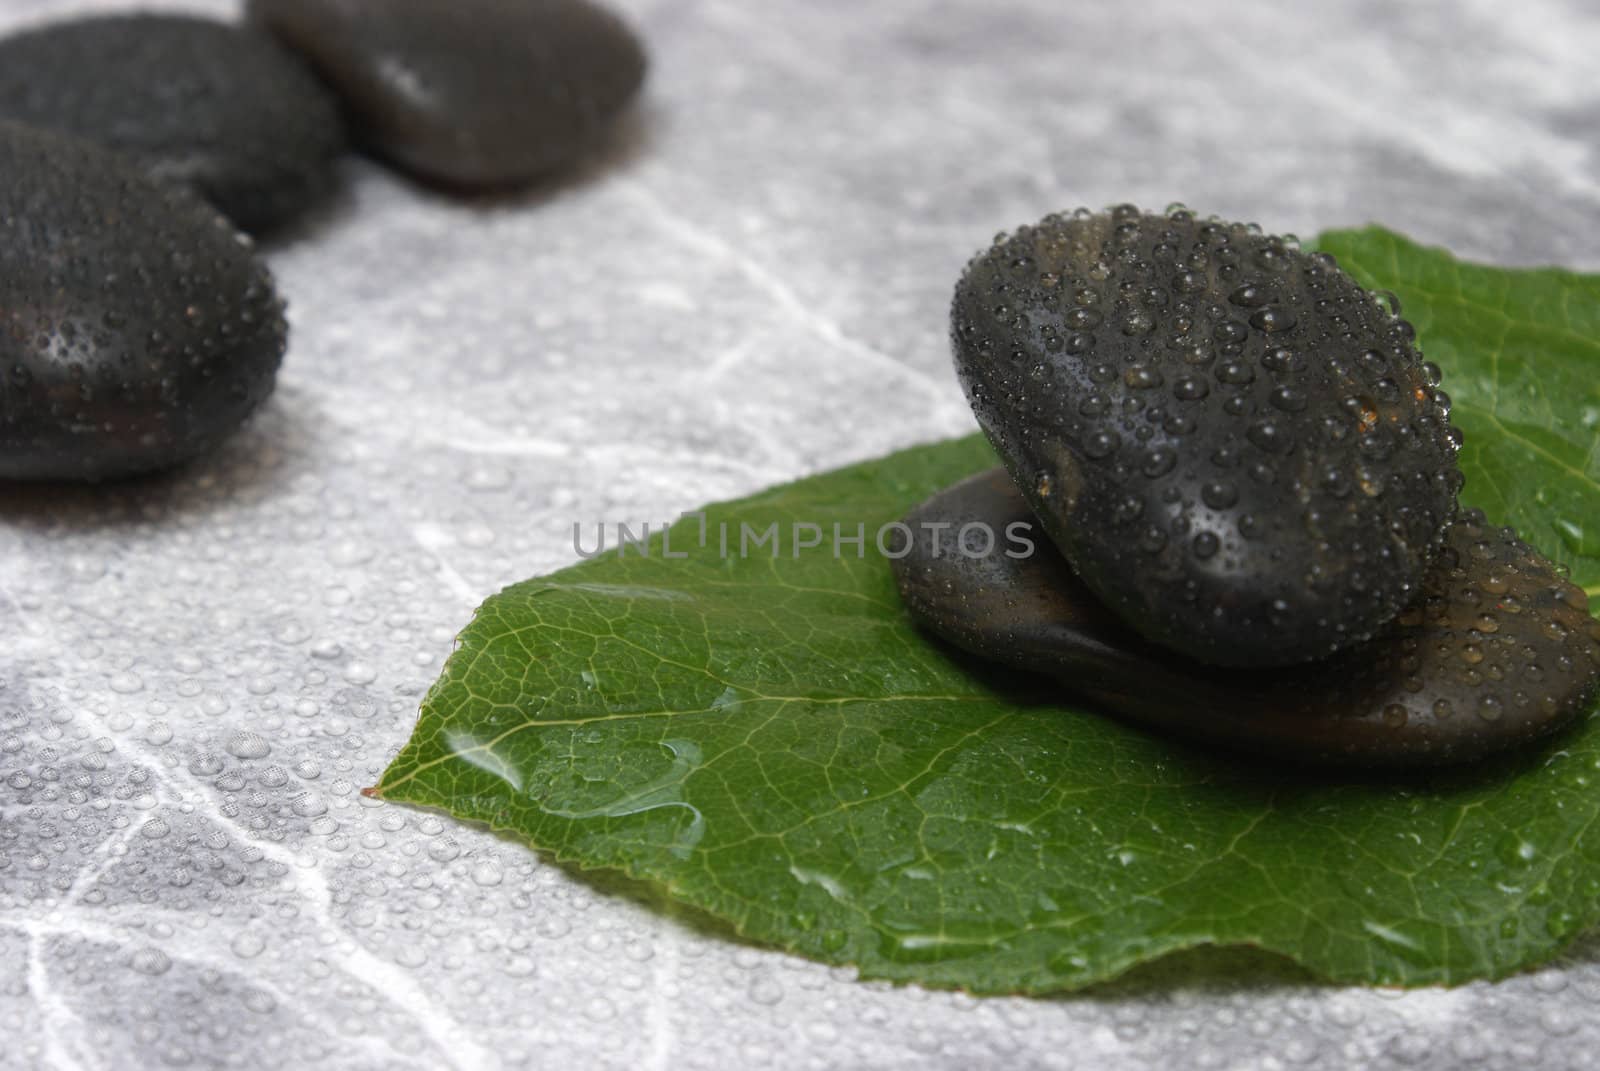 Some fresh water sprinkled over some stones and a leaf which is on a marble background.